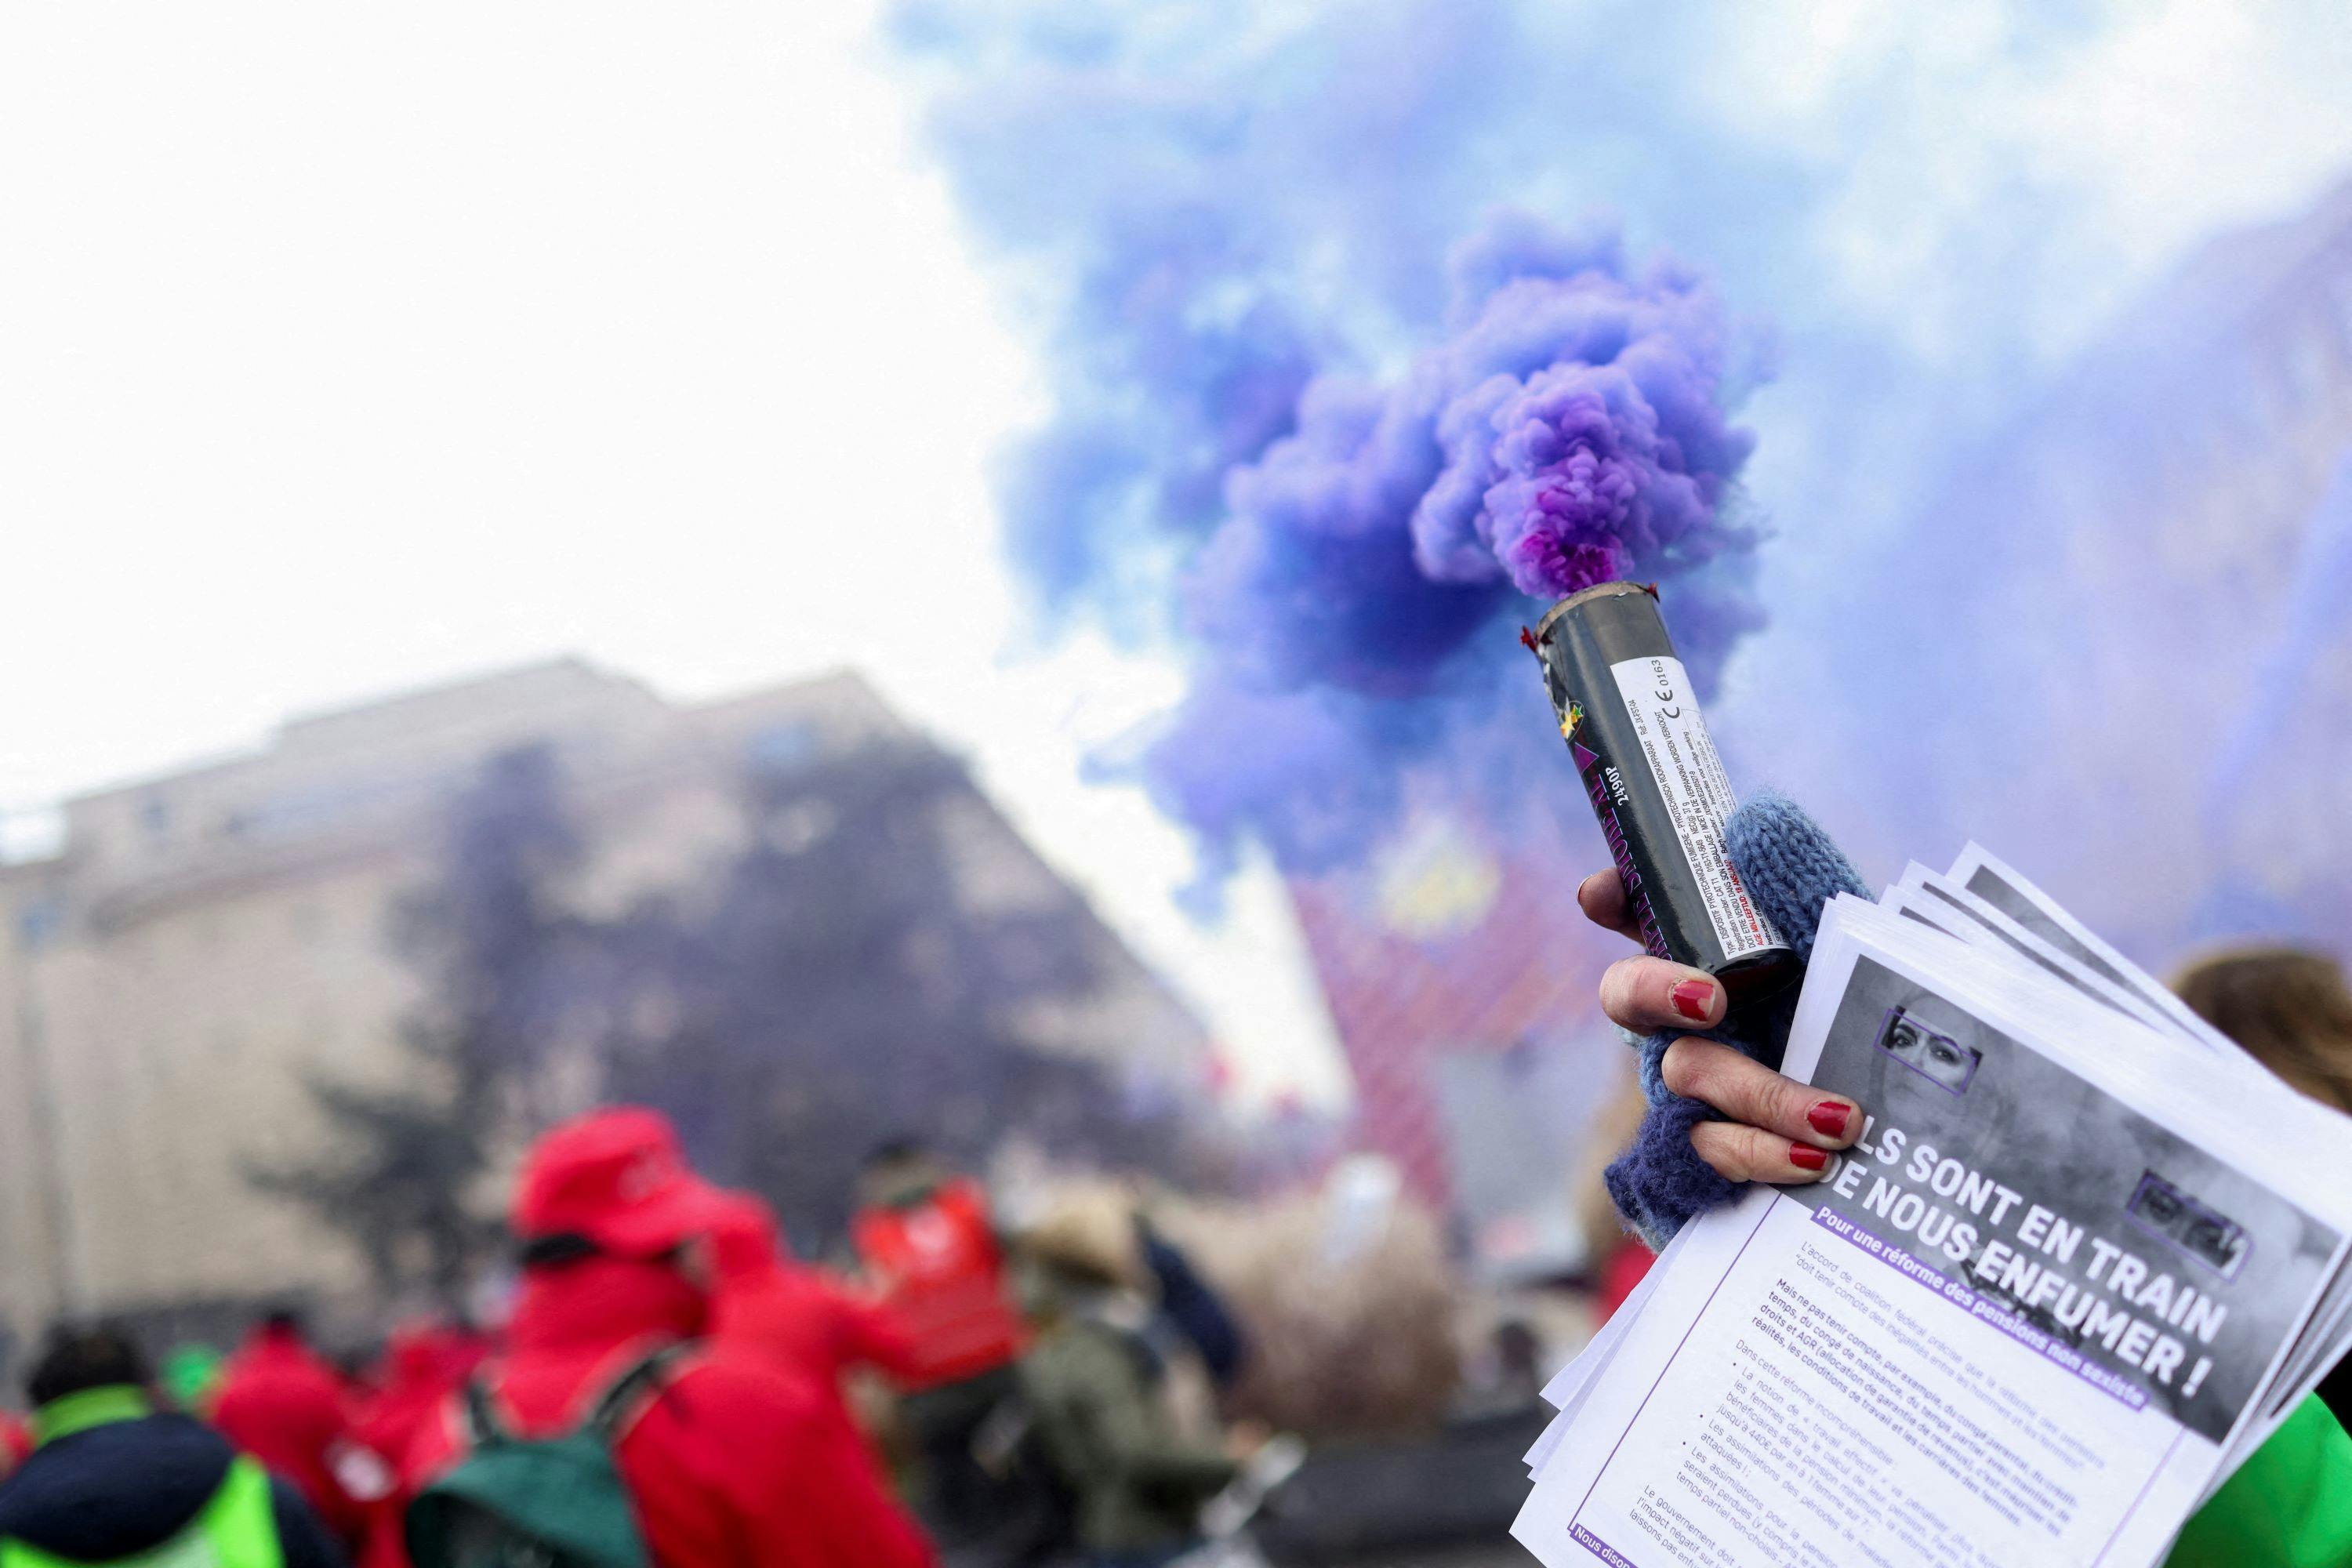 A person holding a smoke grenade takes part in a demonstration against the rising cost of living in Brussels, Belgium